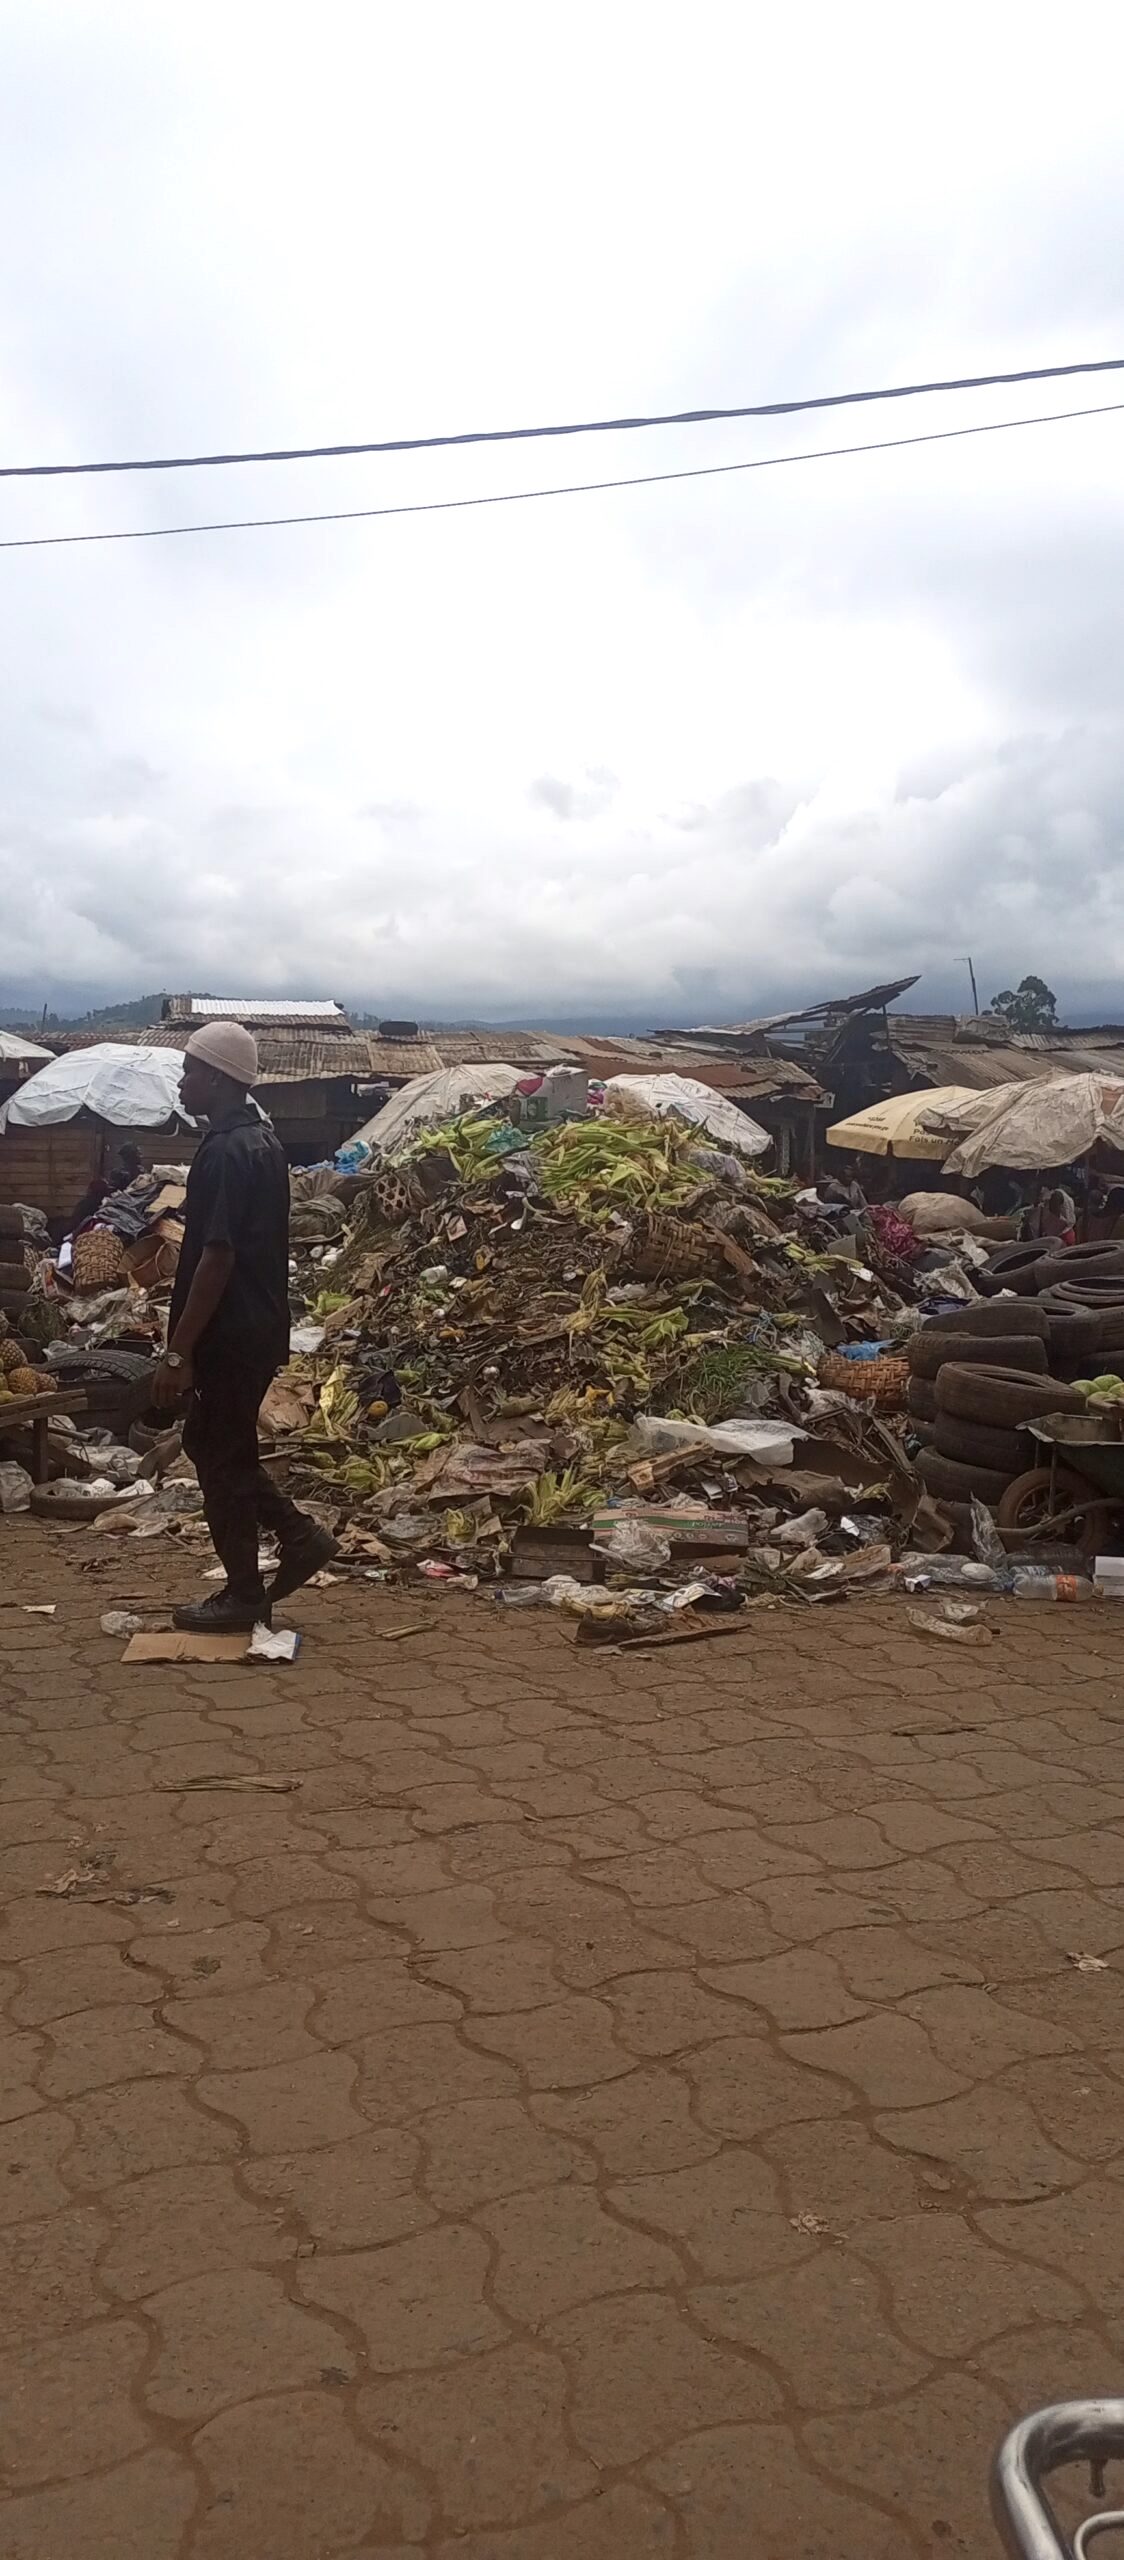 Waste around homes and streets in Bamenda, Cameroon.